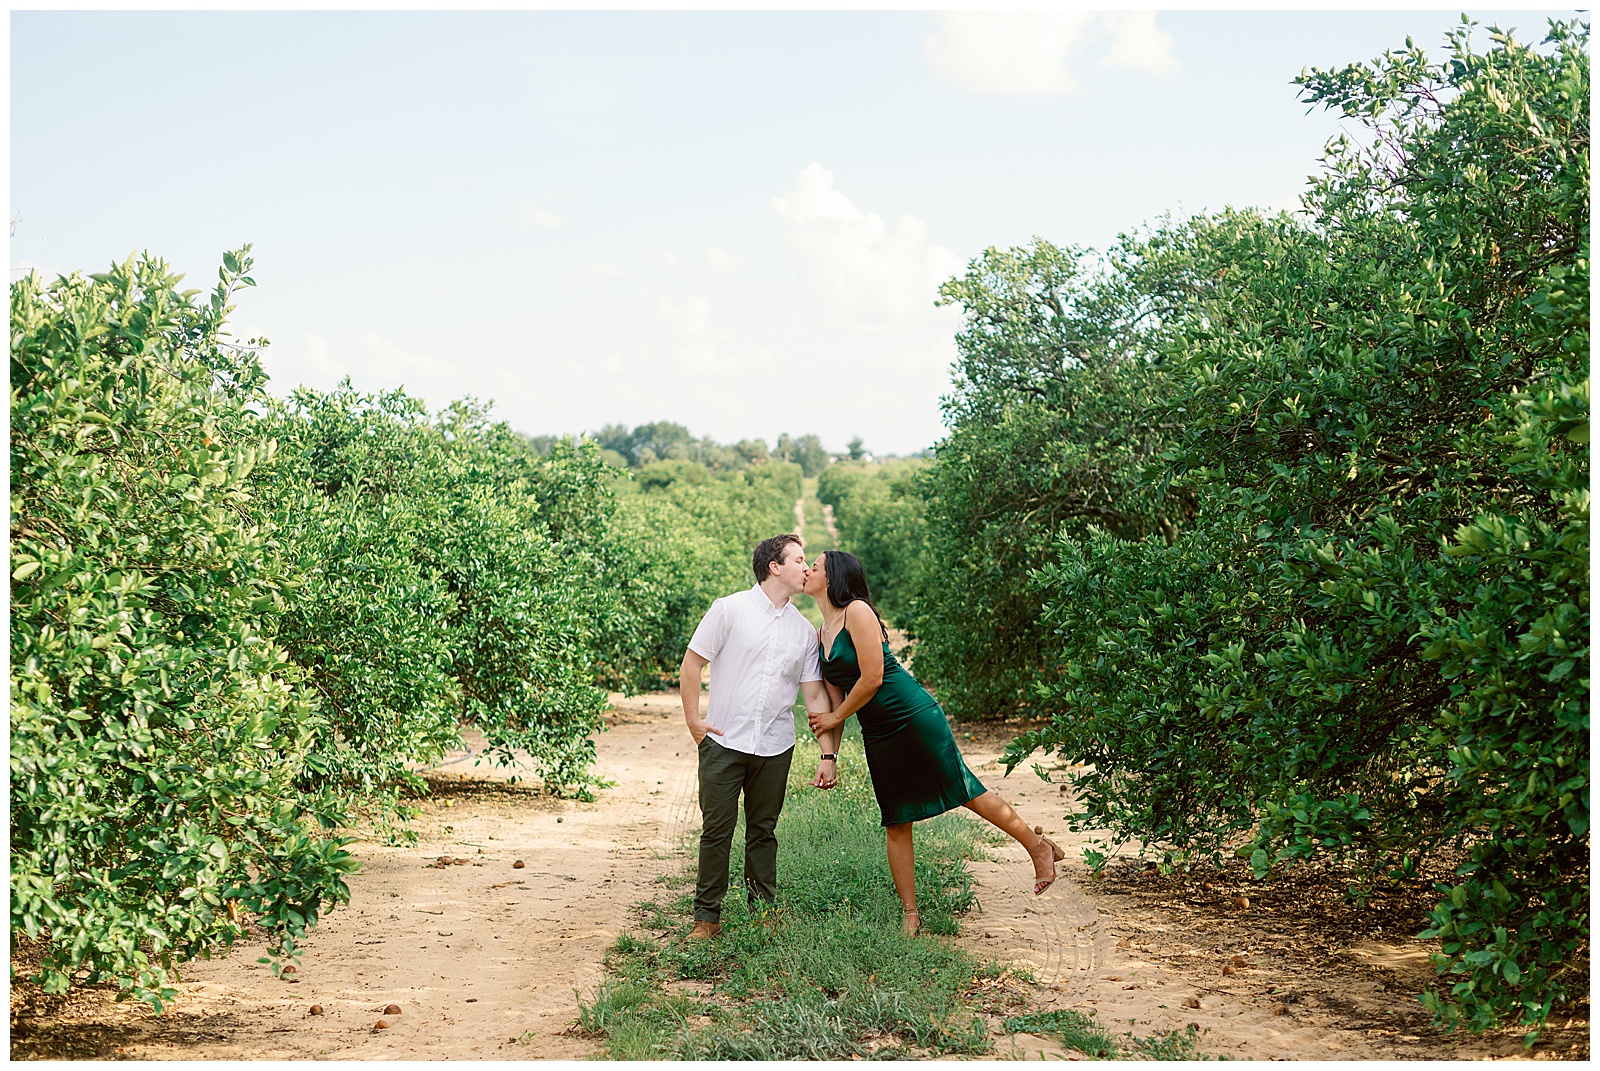 Bok Tower Garden, Bok Tower, Bok Tower Garden Engagement Session, Bok Tower Engagement Photos